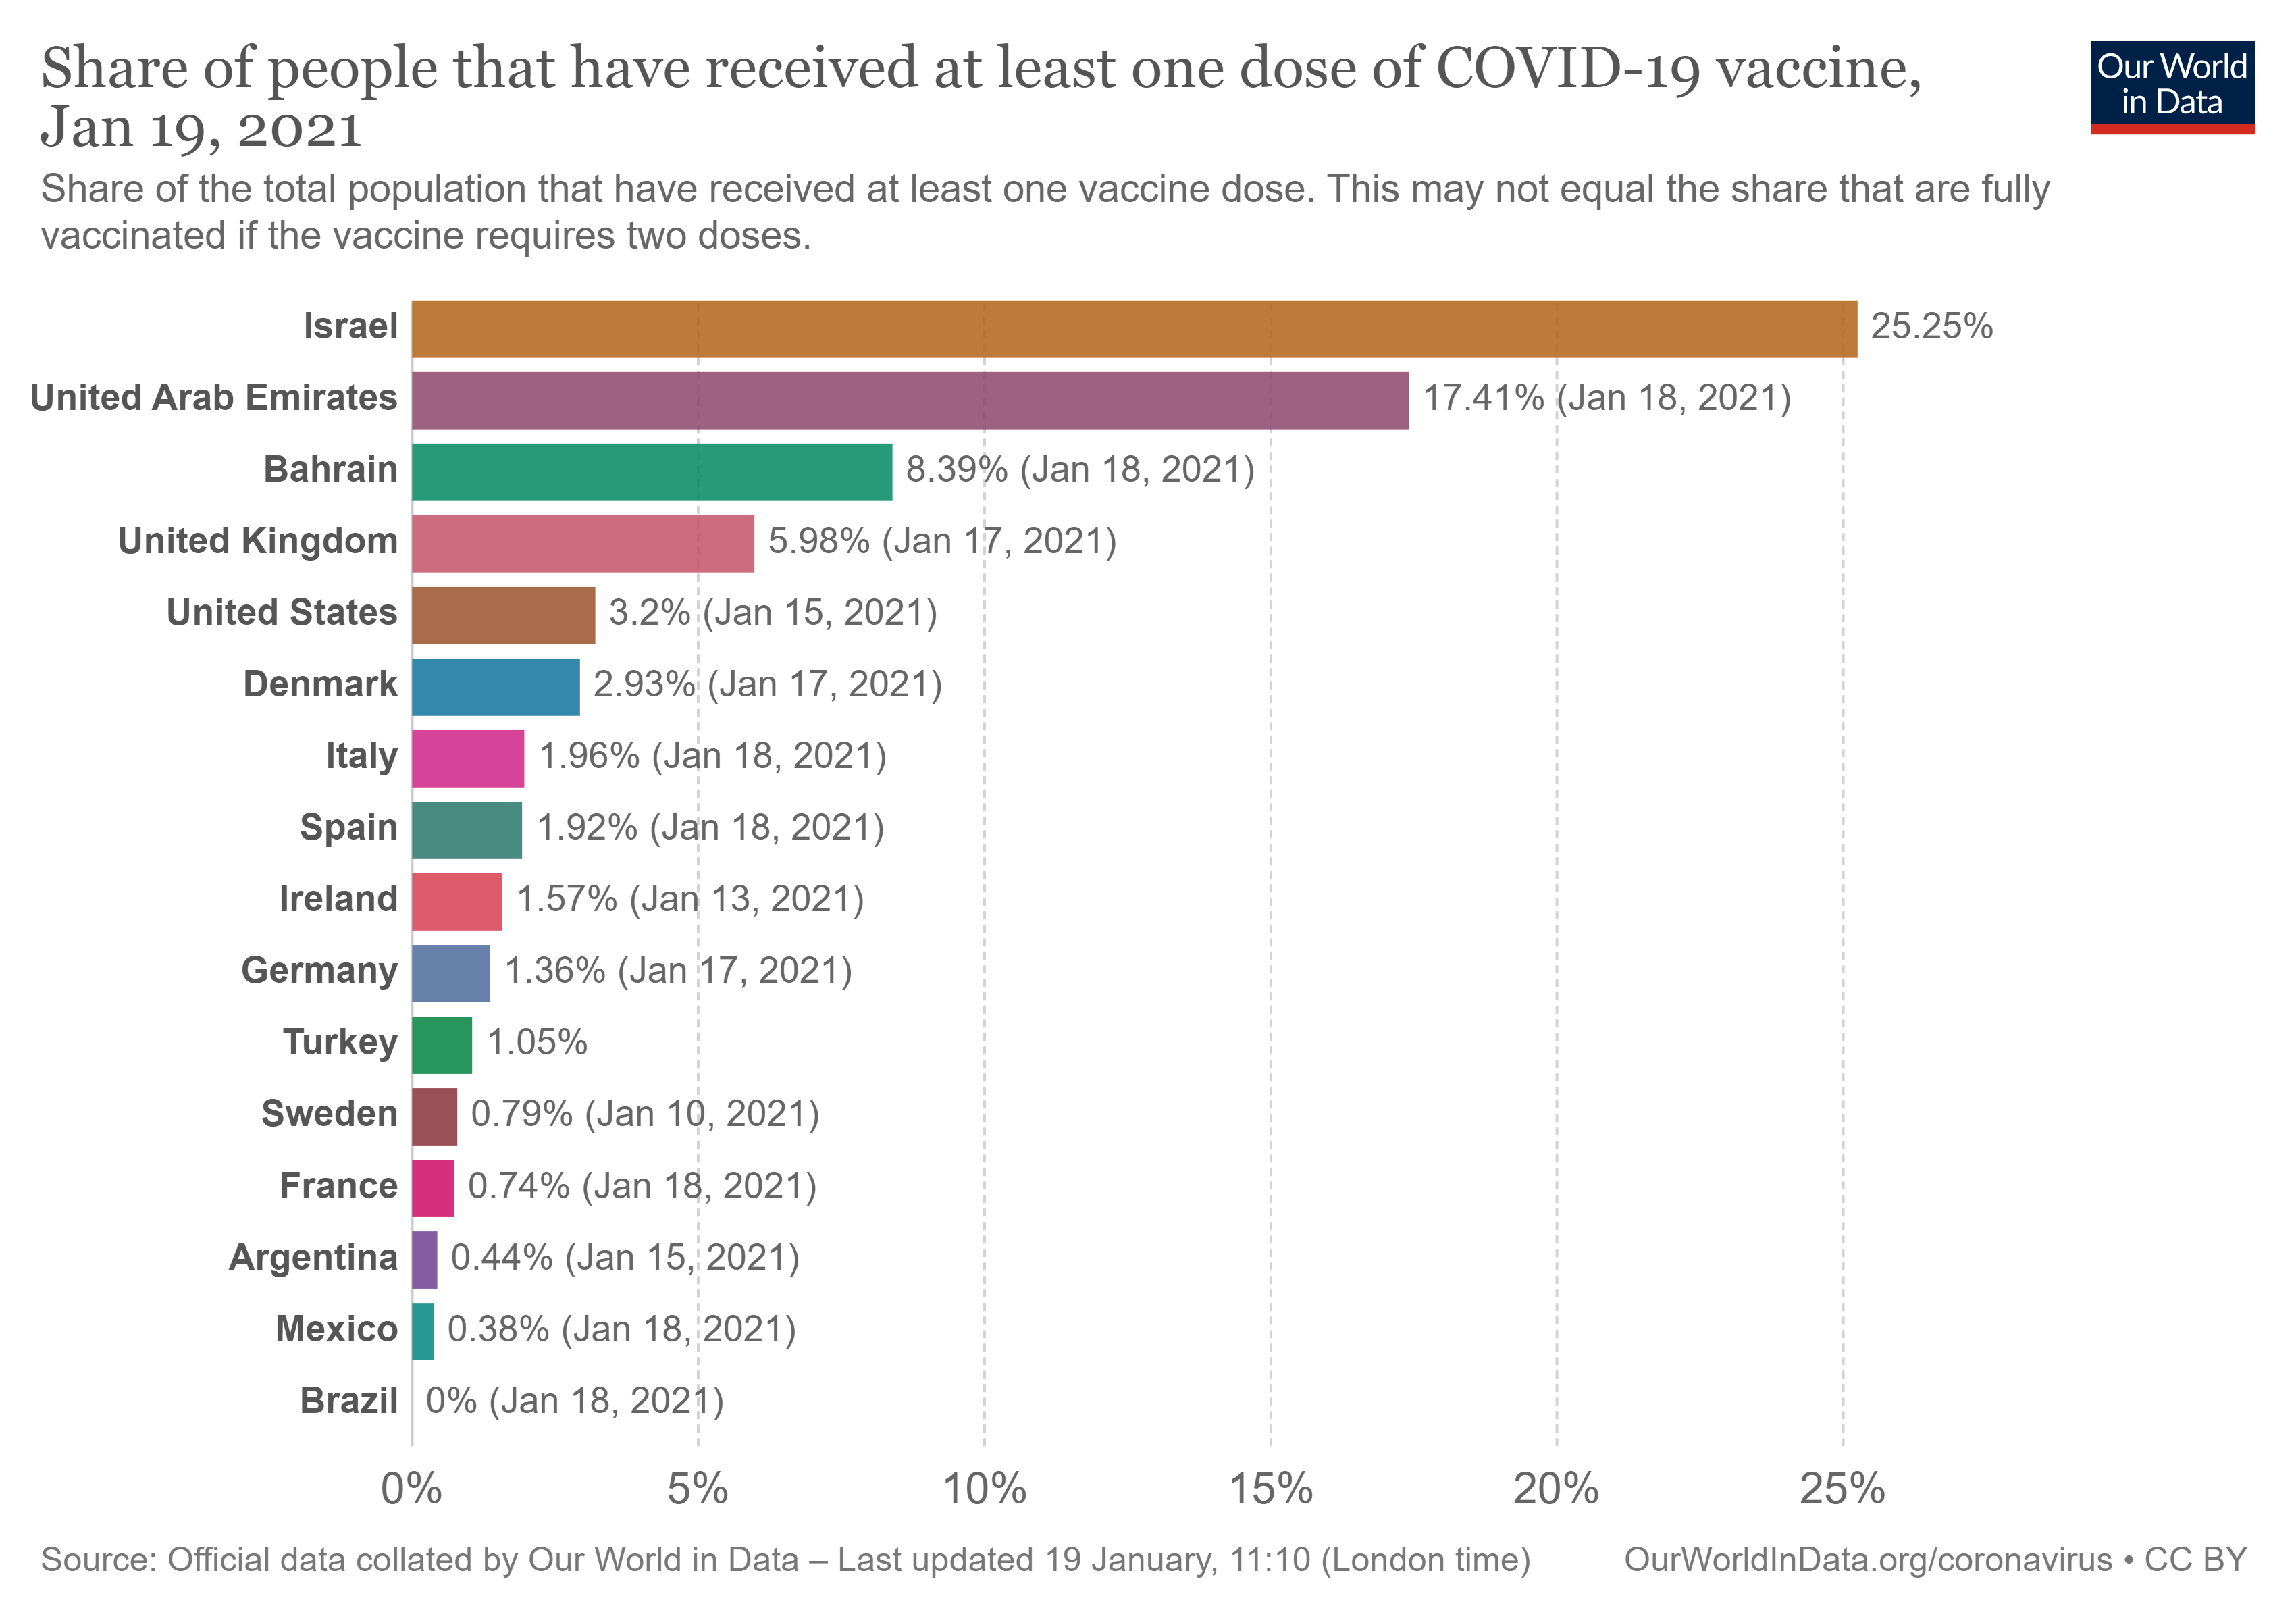 Share of people vaccinated 